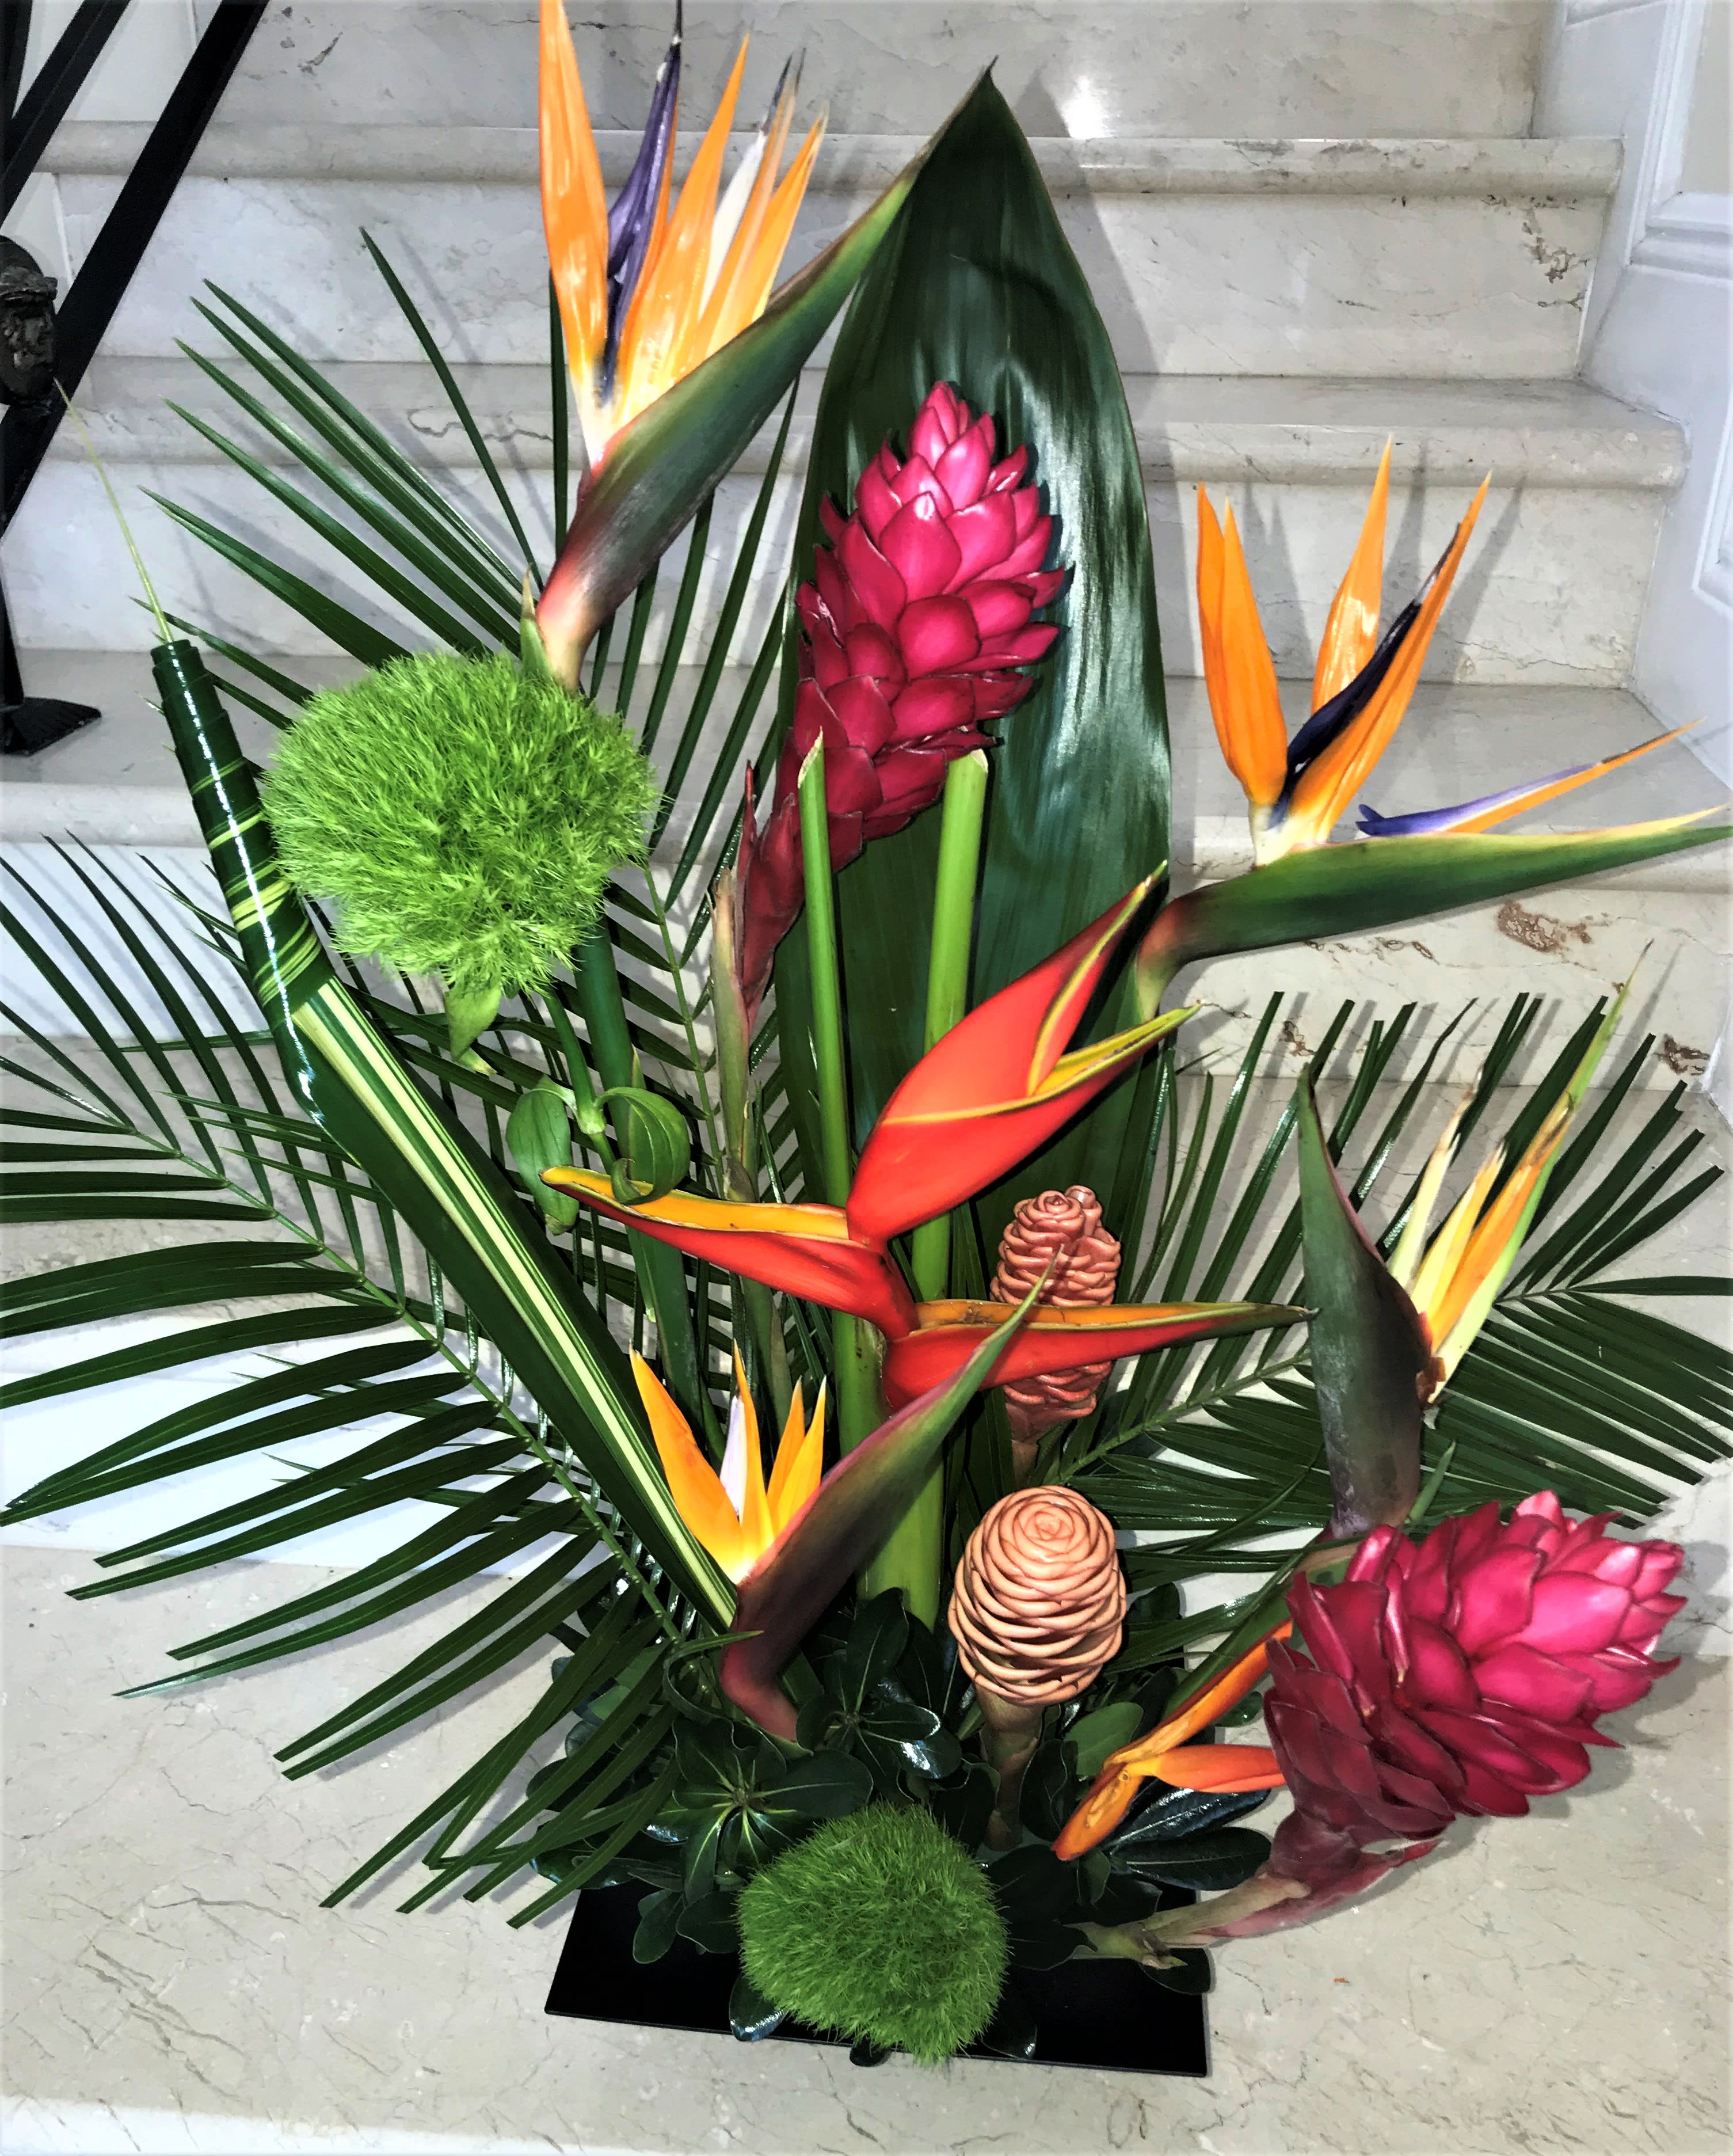 Tropical Sensation - Tropical arrangement arranged in a vase. Deluxe has more tropical flowers and greens than shown. Premium had much more tropical flowers and greens.